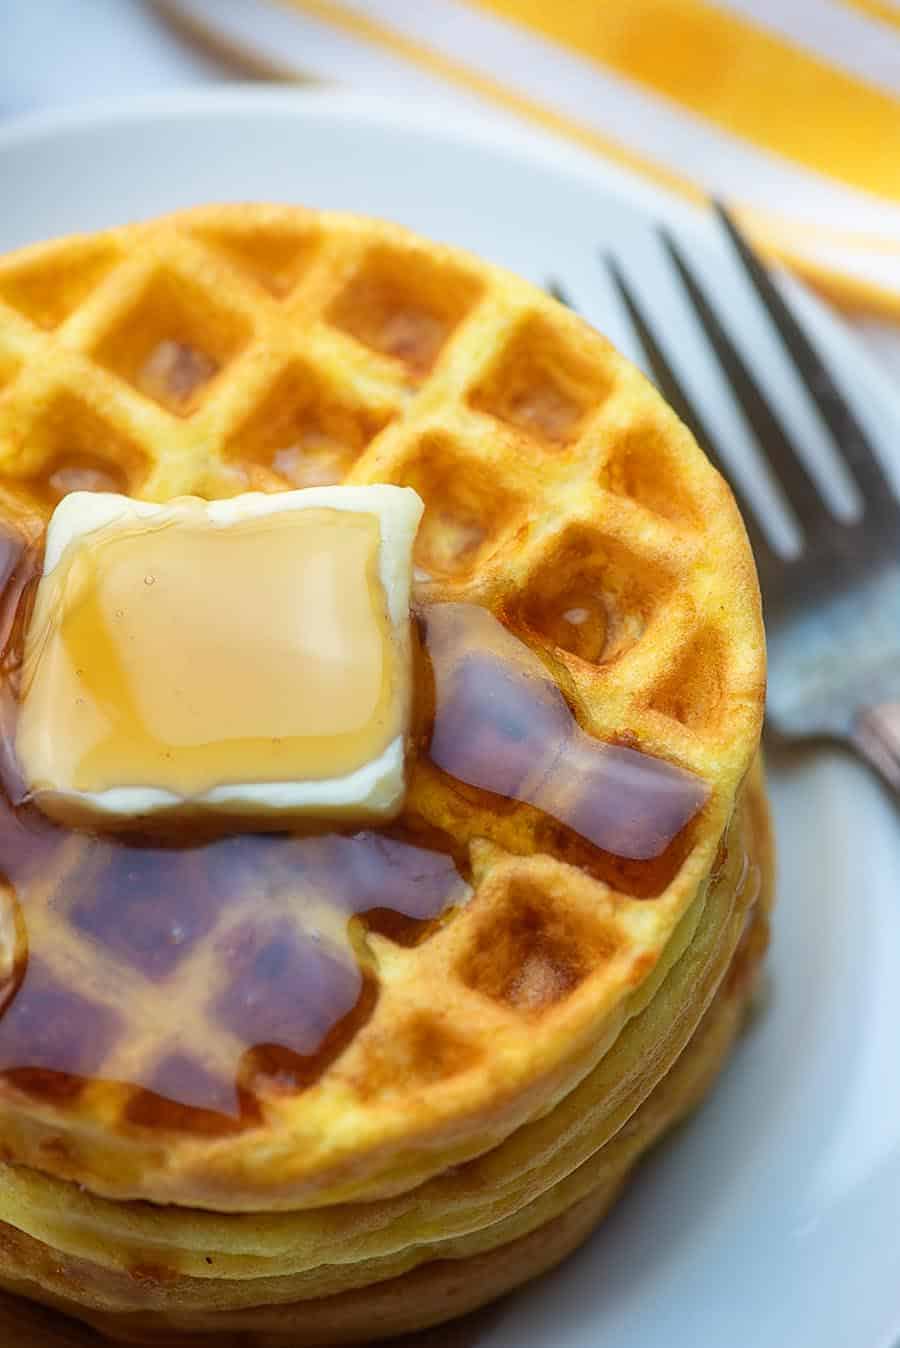 https://thatlowcarblife.com/wp-content/uploads/2019/08/low-carb-waffles.jpg